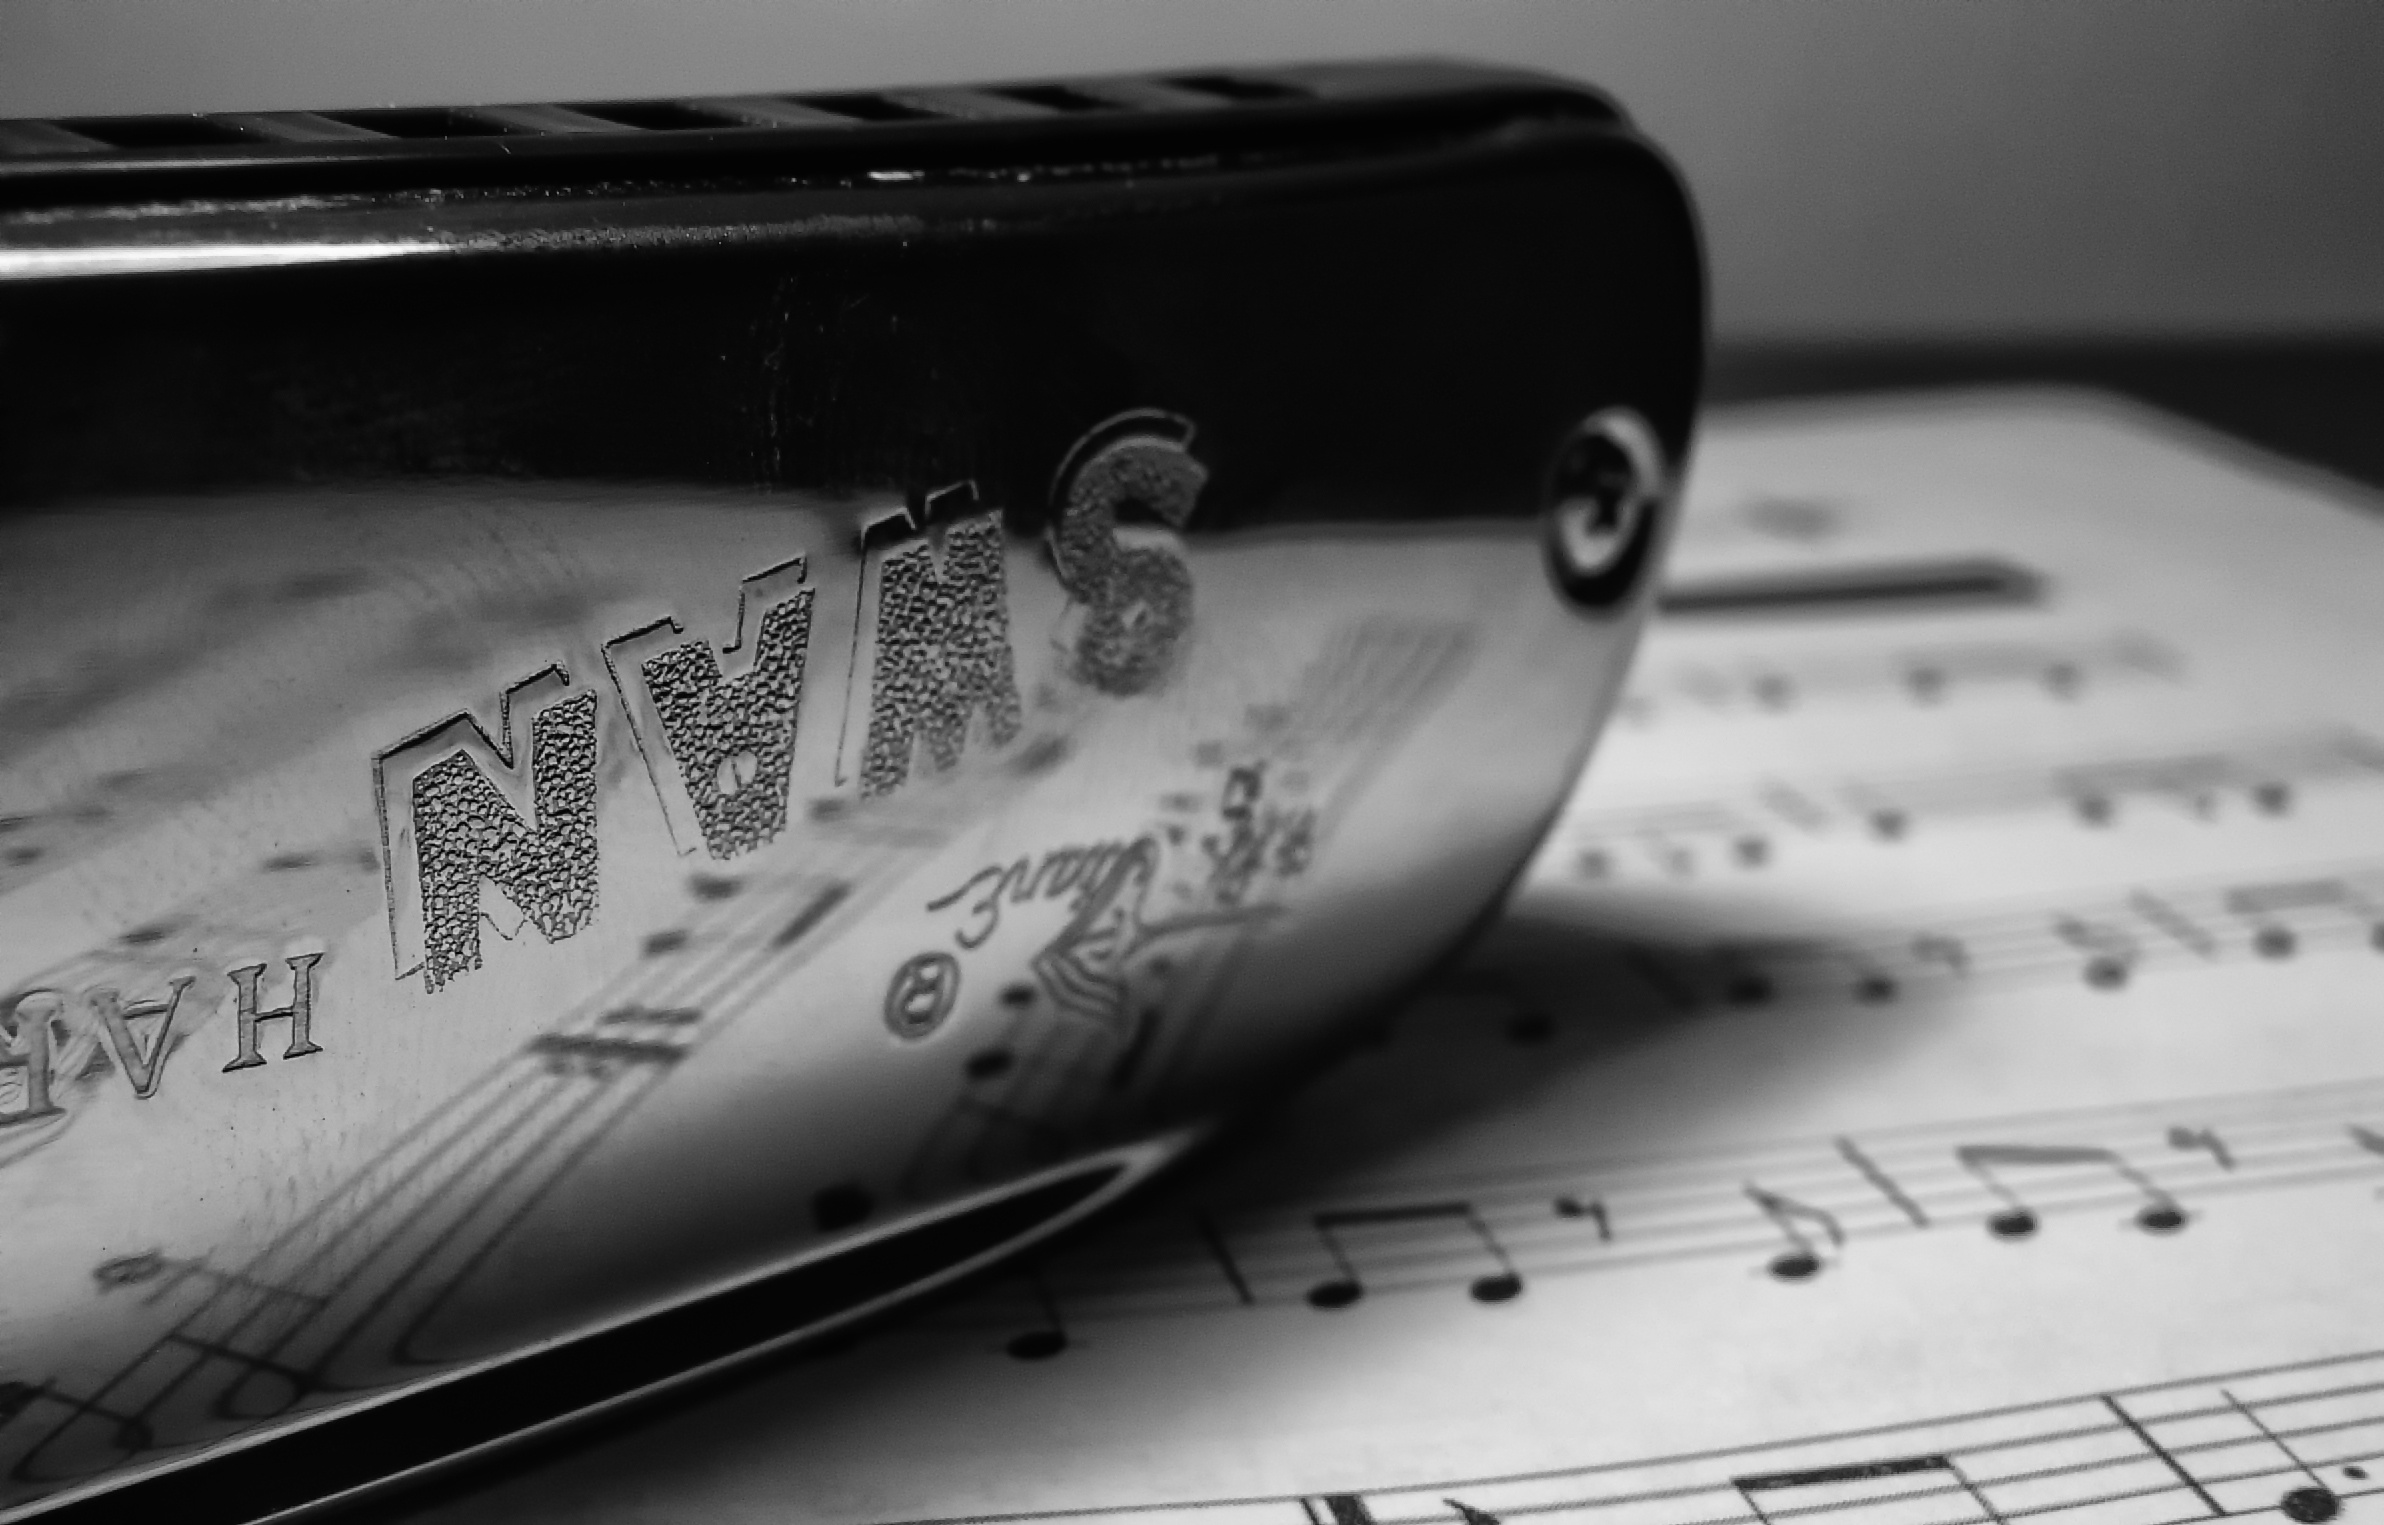 Harmonica: Monochrome, Musical Instrument Close-Up, Music Notes, Metal Cover Plates, Swan Musical Instrument Co., China. 2390x1530 HD Wallpaper.